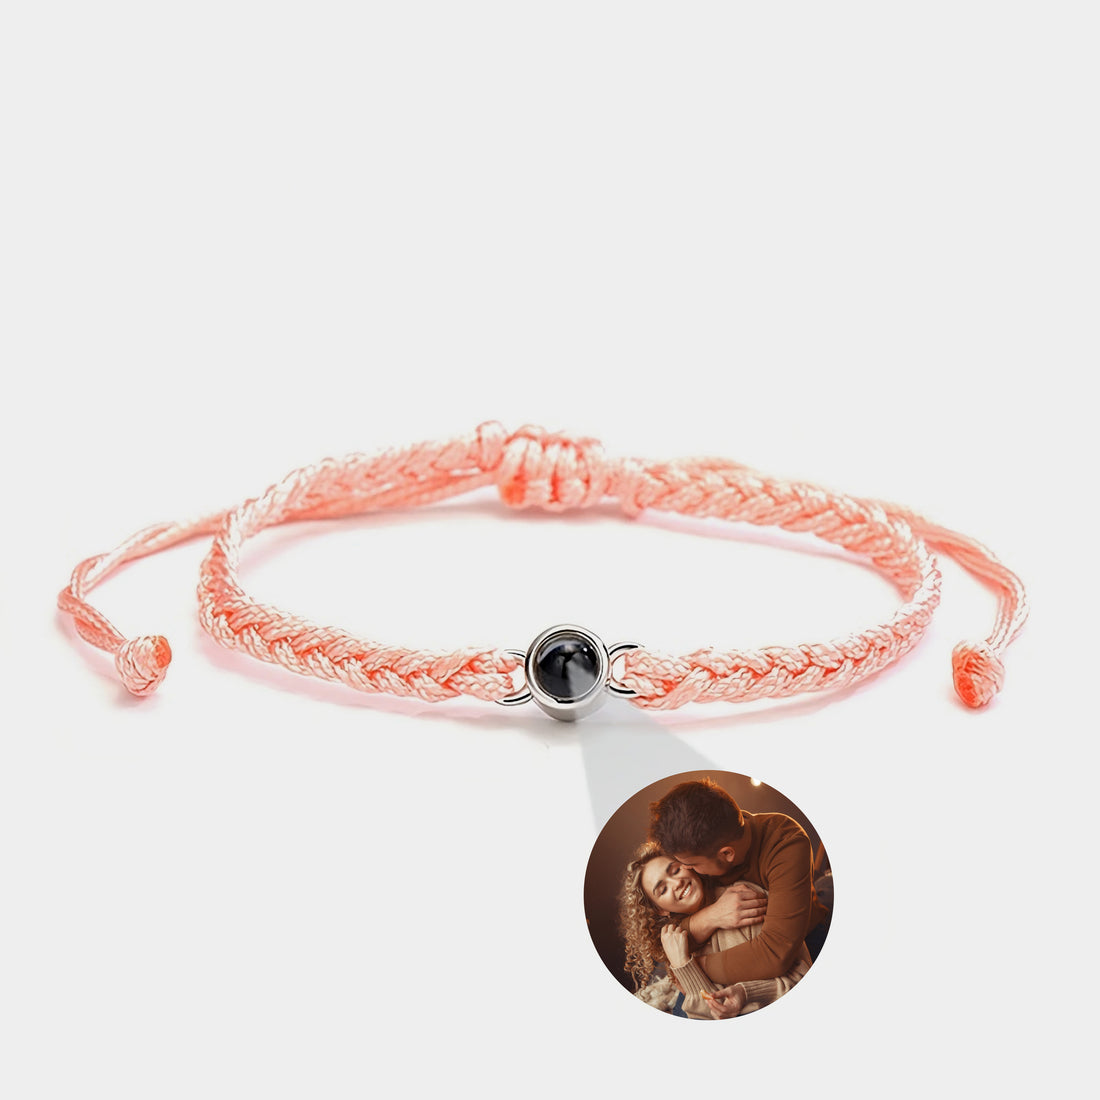 Personalized Rope Bracelet with Photo Projection